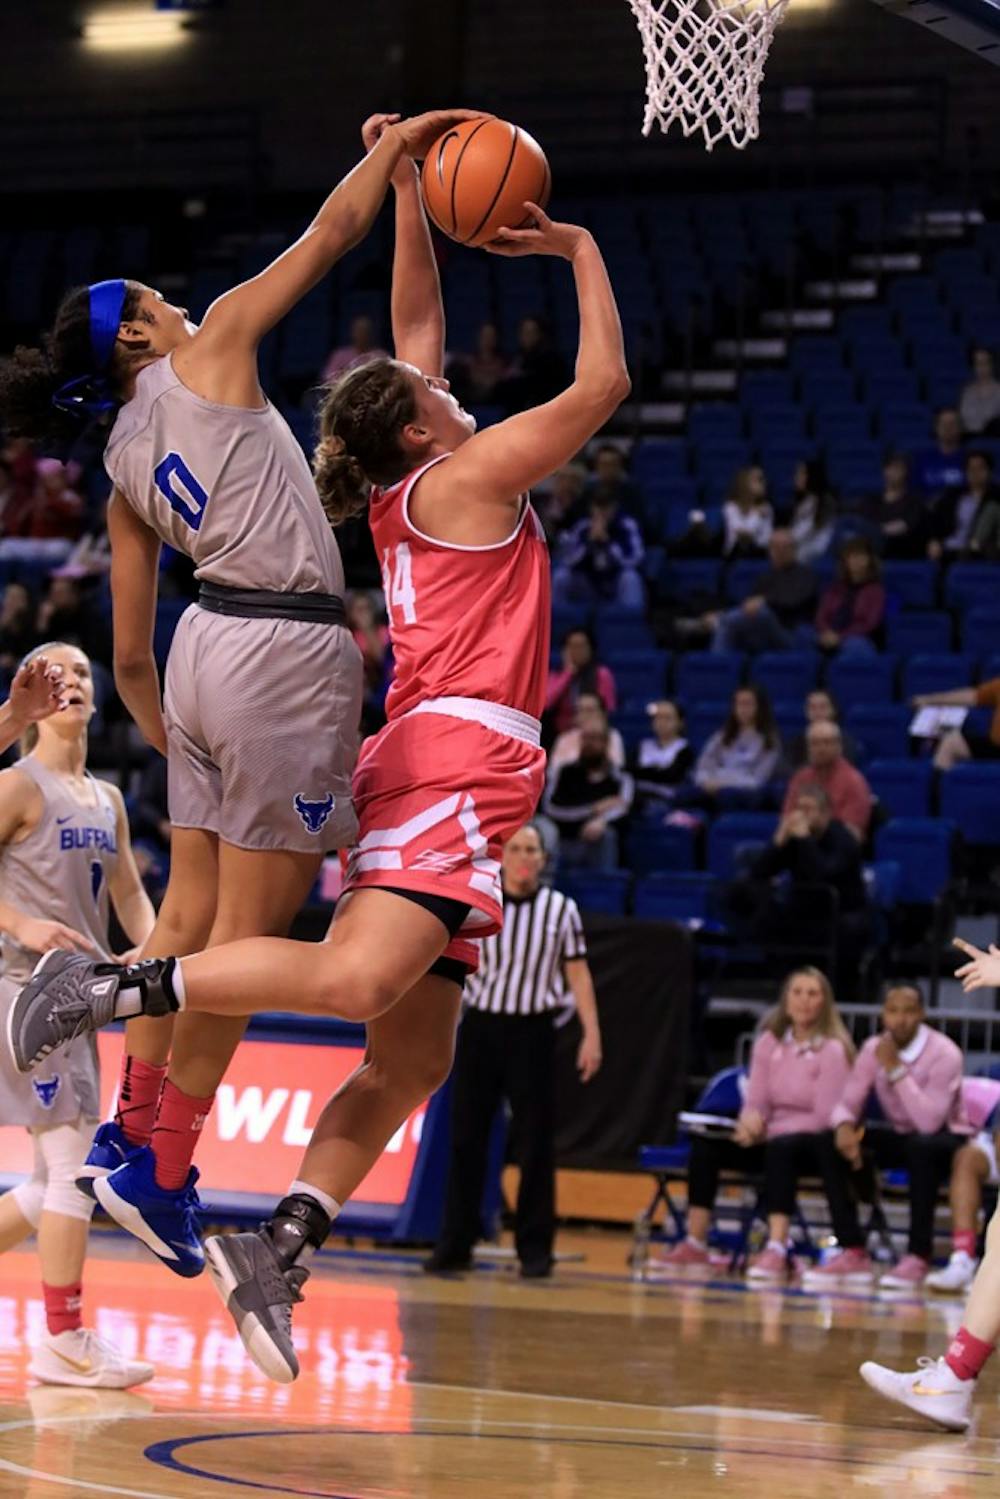 <p>Sophomore forward Summer Hemphill rejects the opposing player's shot. Hemphill had 18 points in the game against the Akron Zips on Saturday.</p>